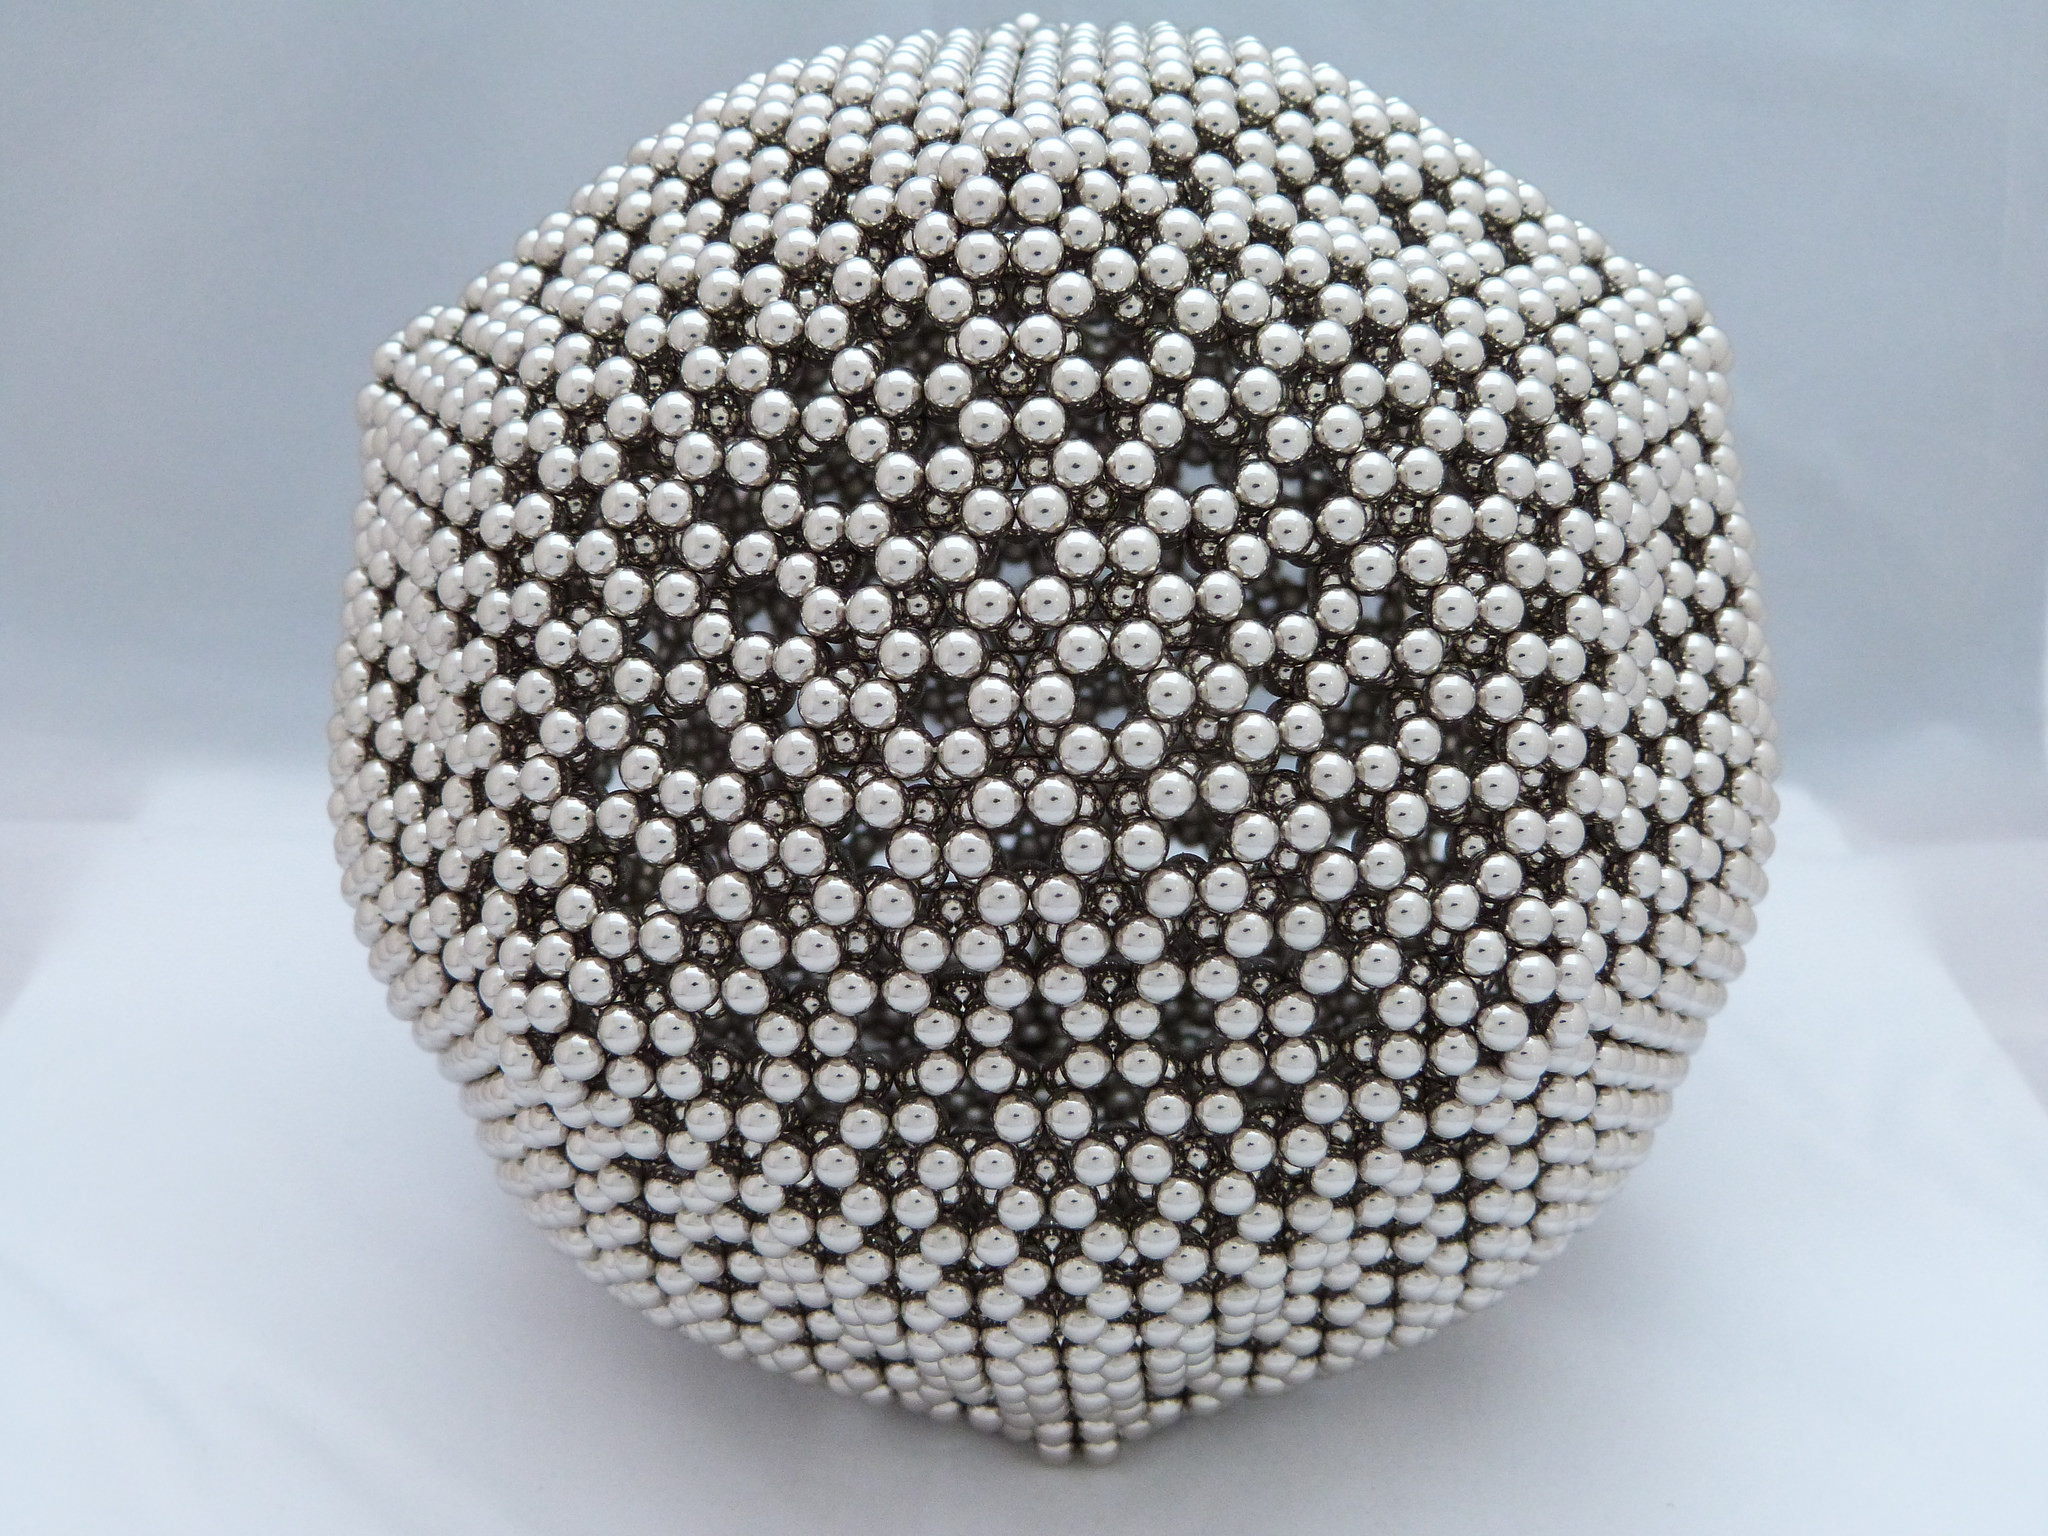 stress relief magnetic balls